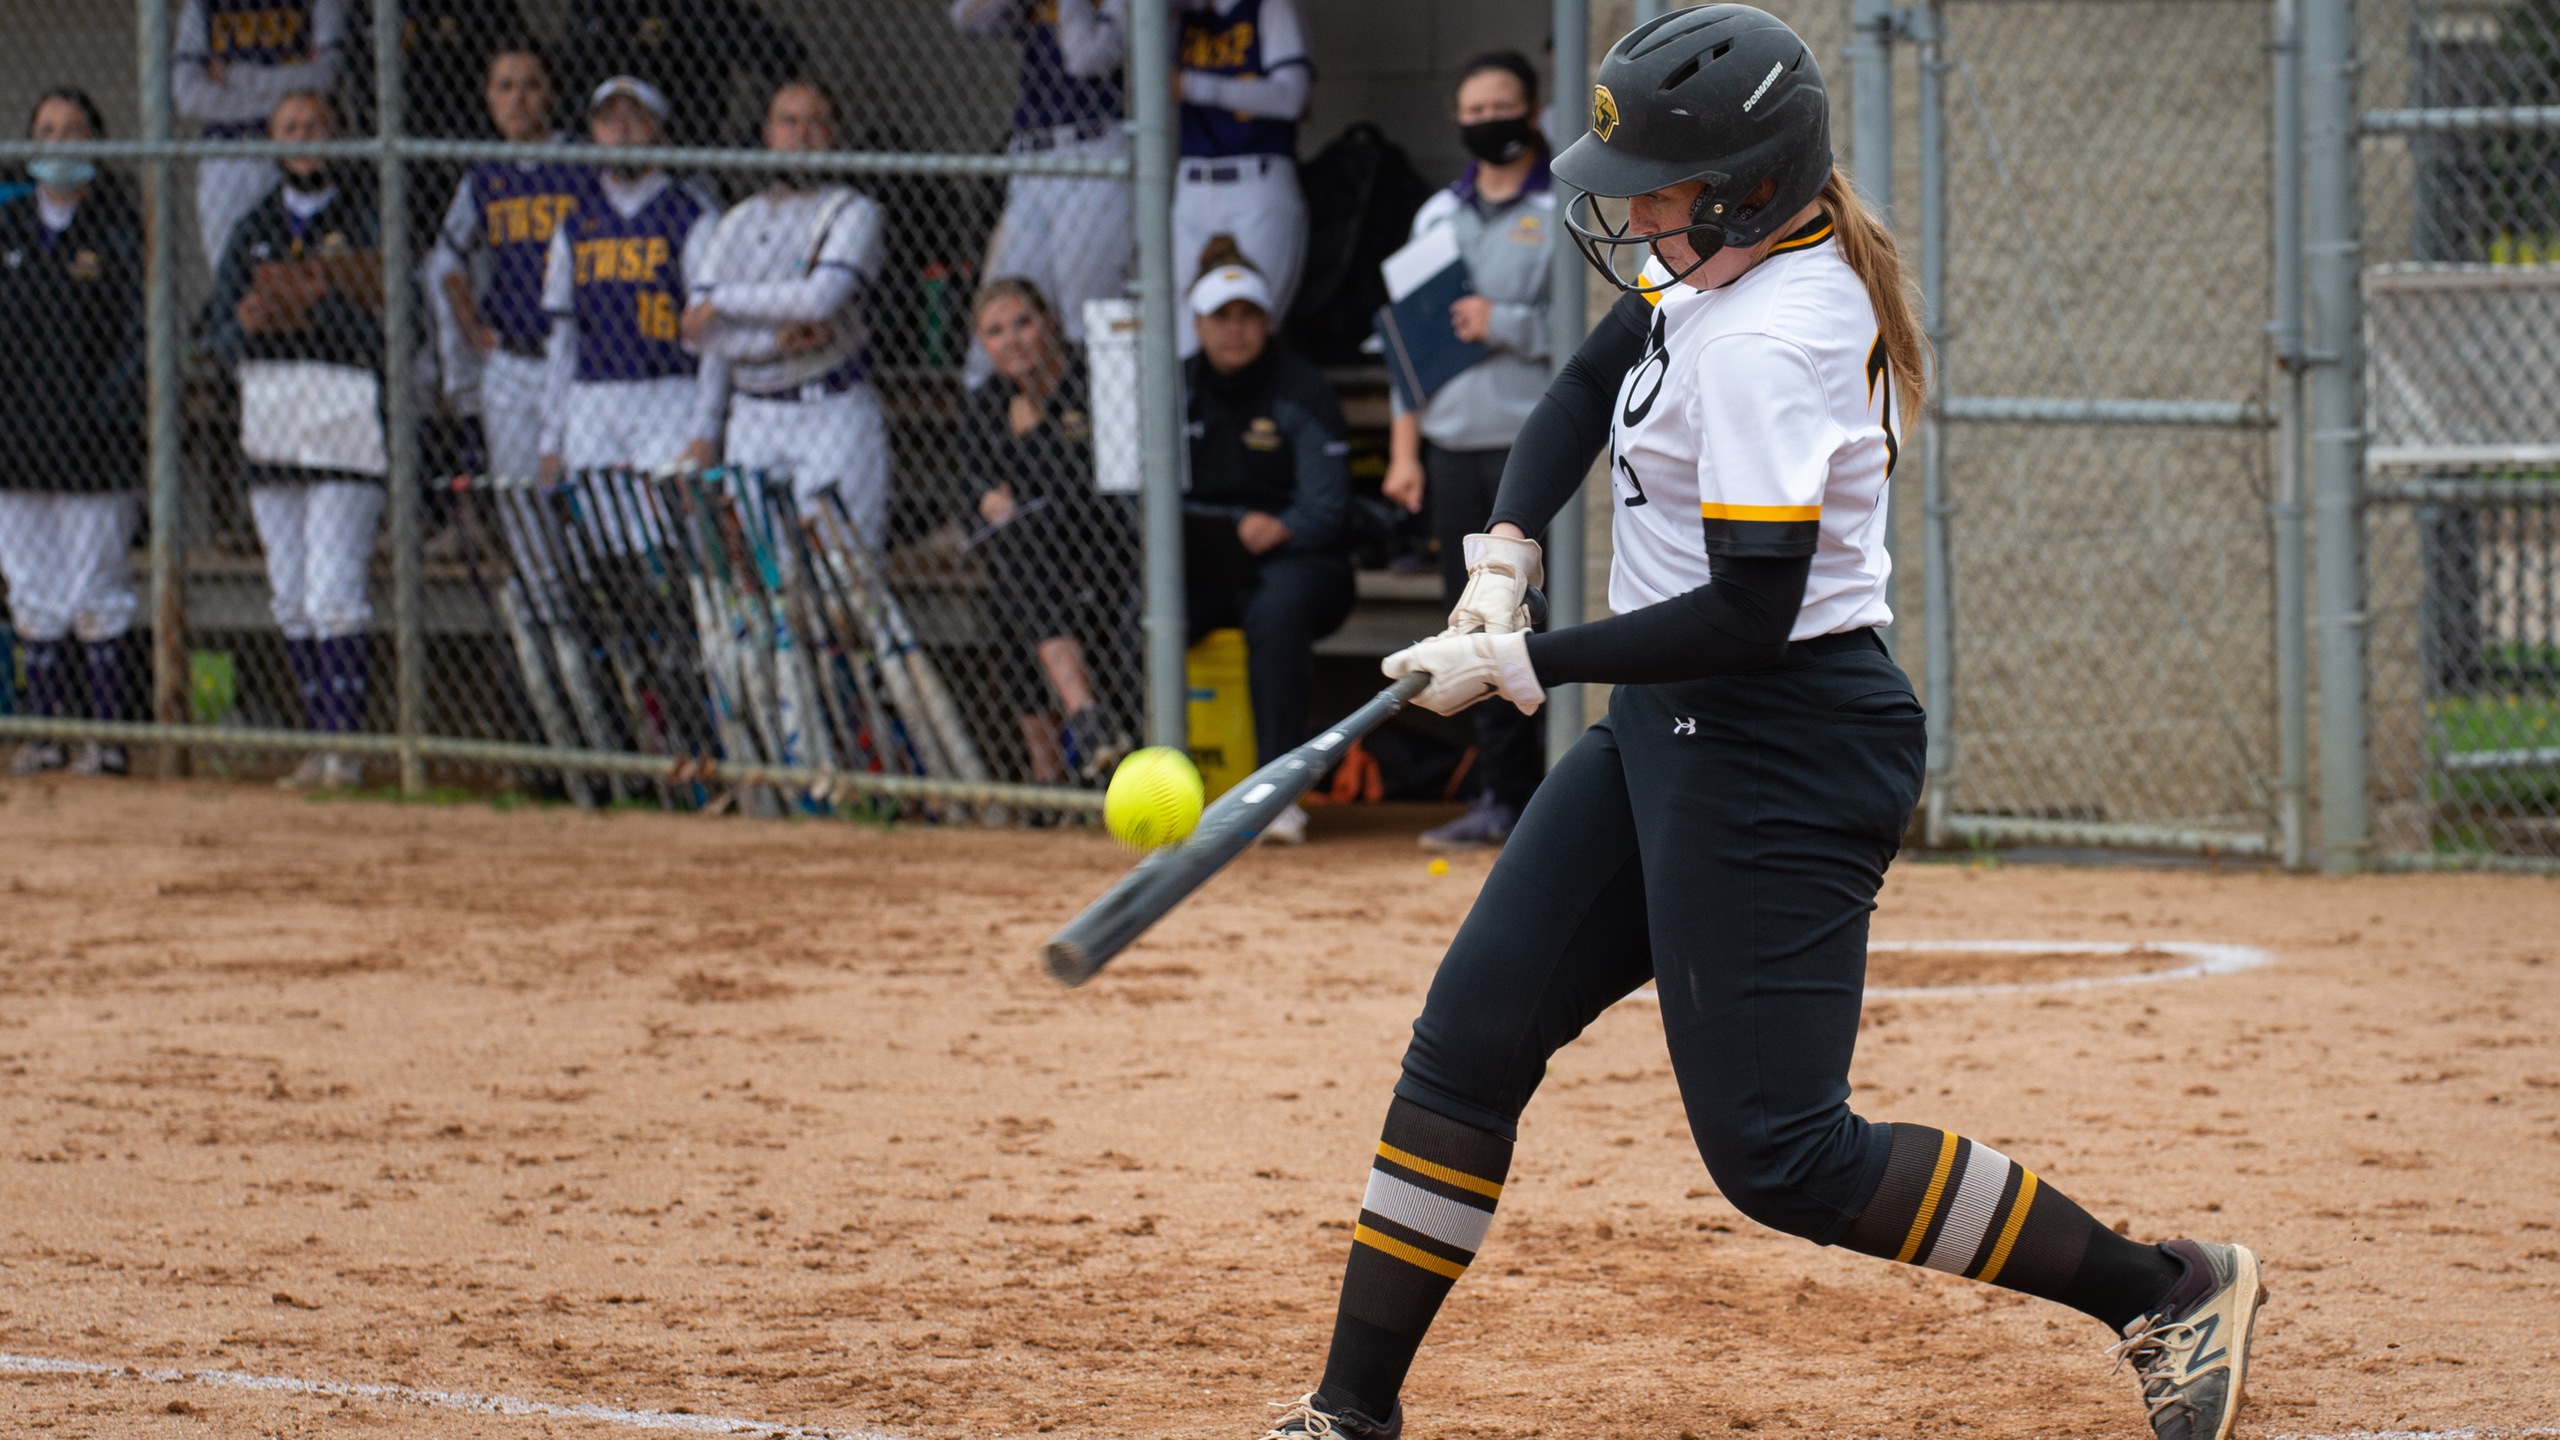 Hannah Ritter had three hits against UW-Stevens Point in the opener, including her first collegiate home run.